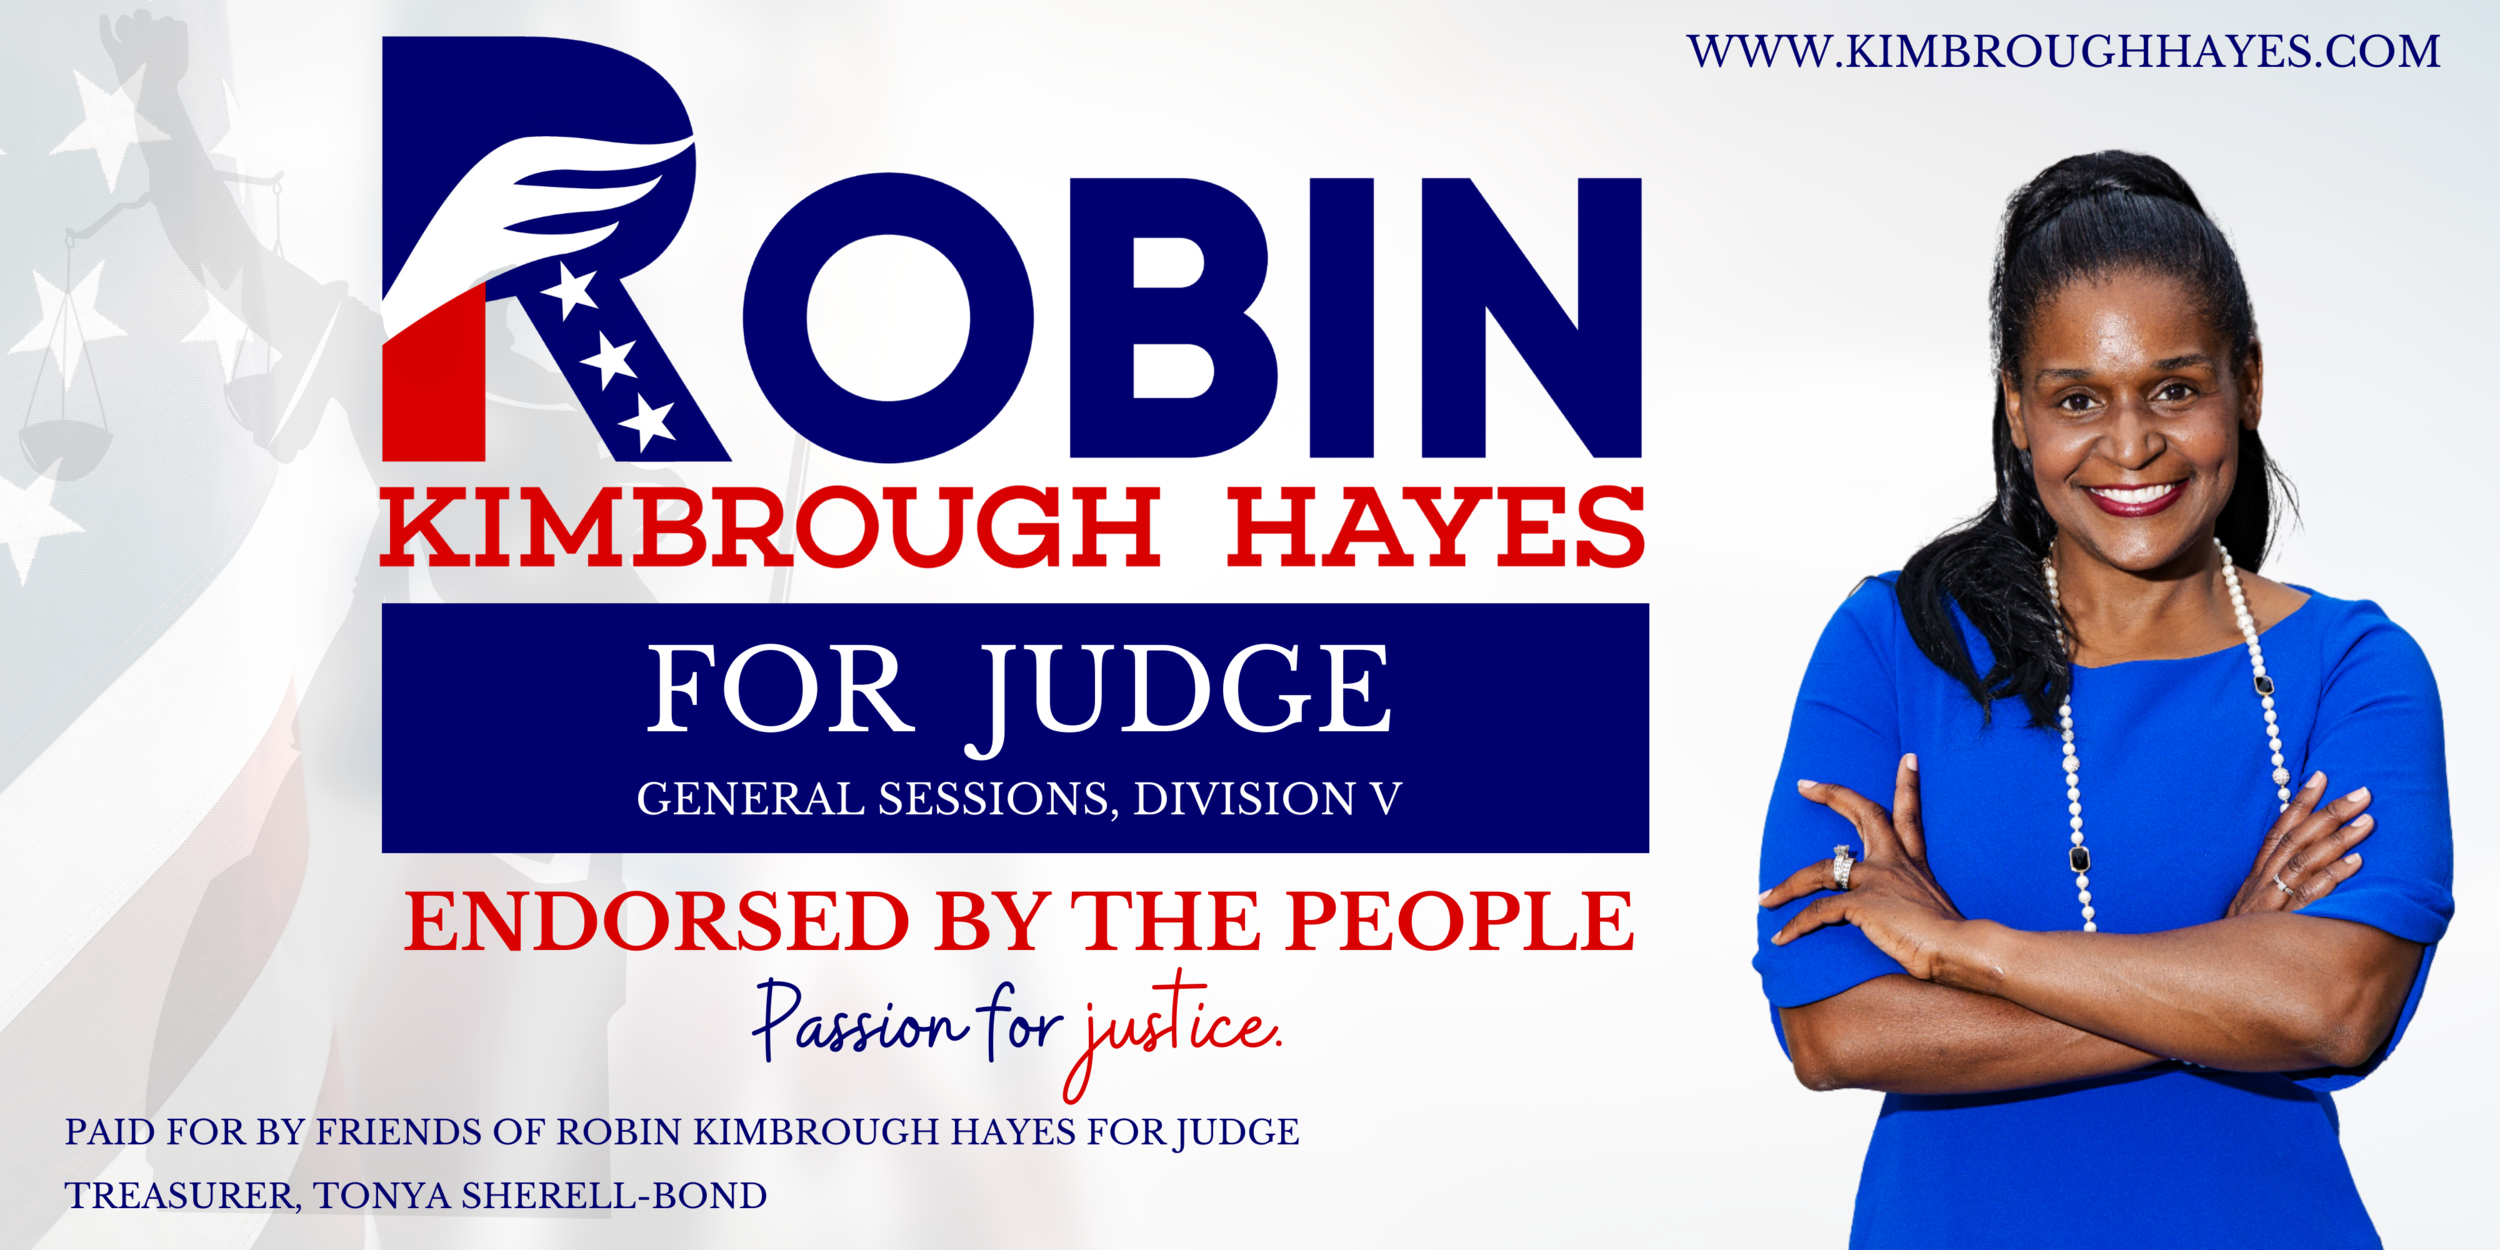 Robin Kimbrough Hayes for Justice